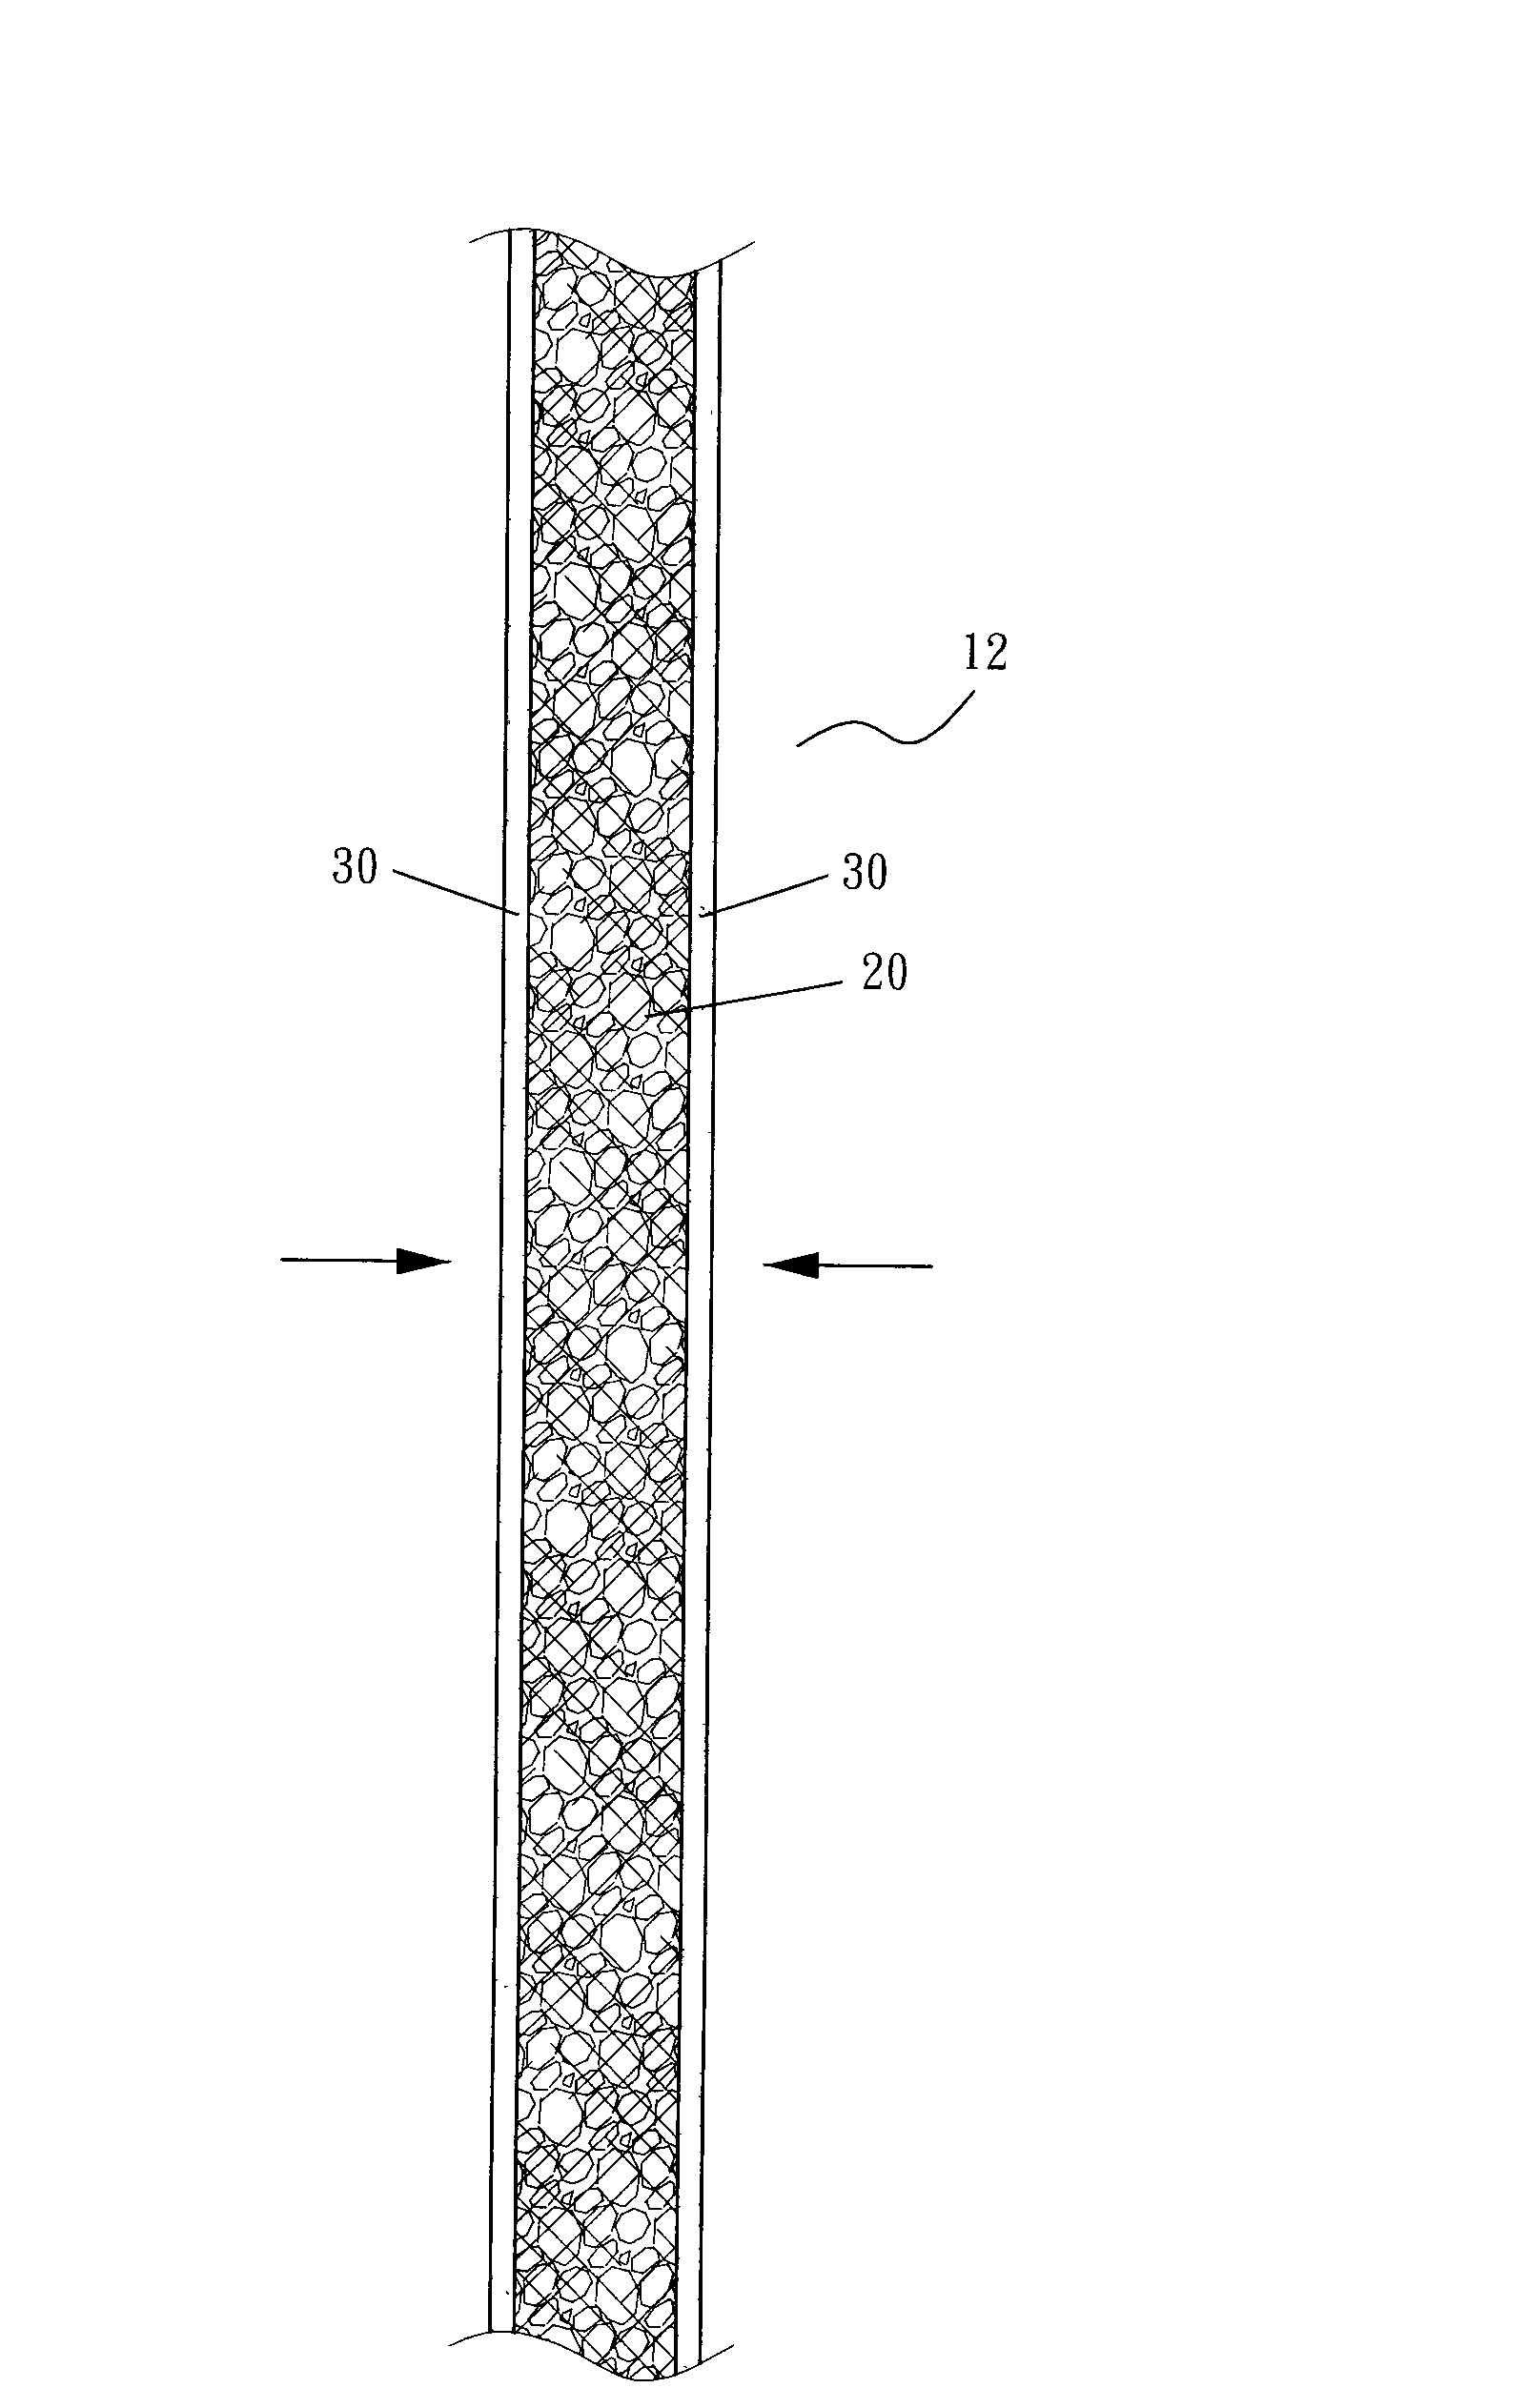 Composition structure of sound absorption and insulation composite material